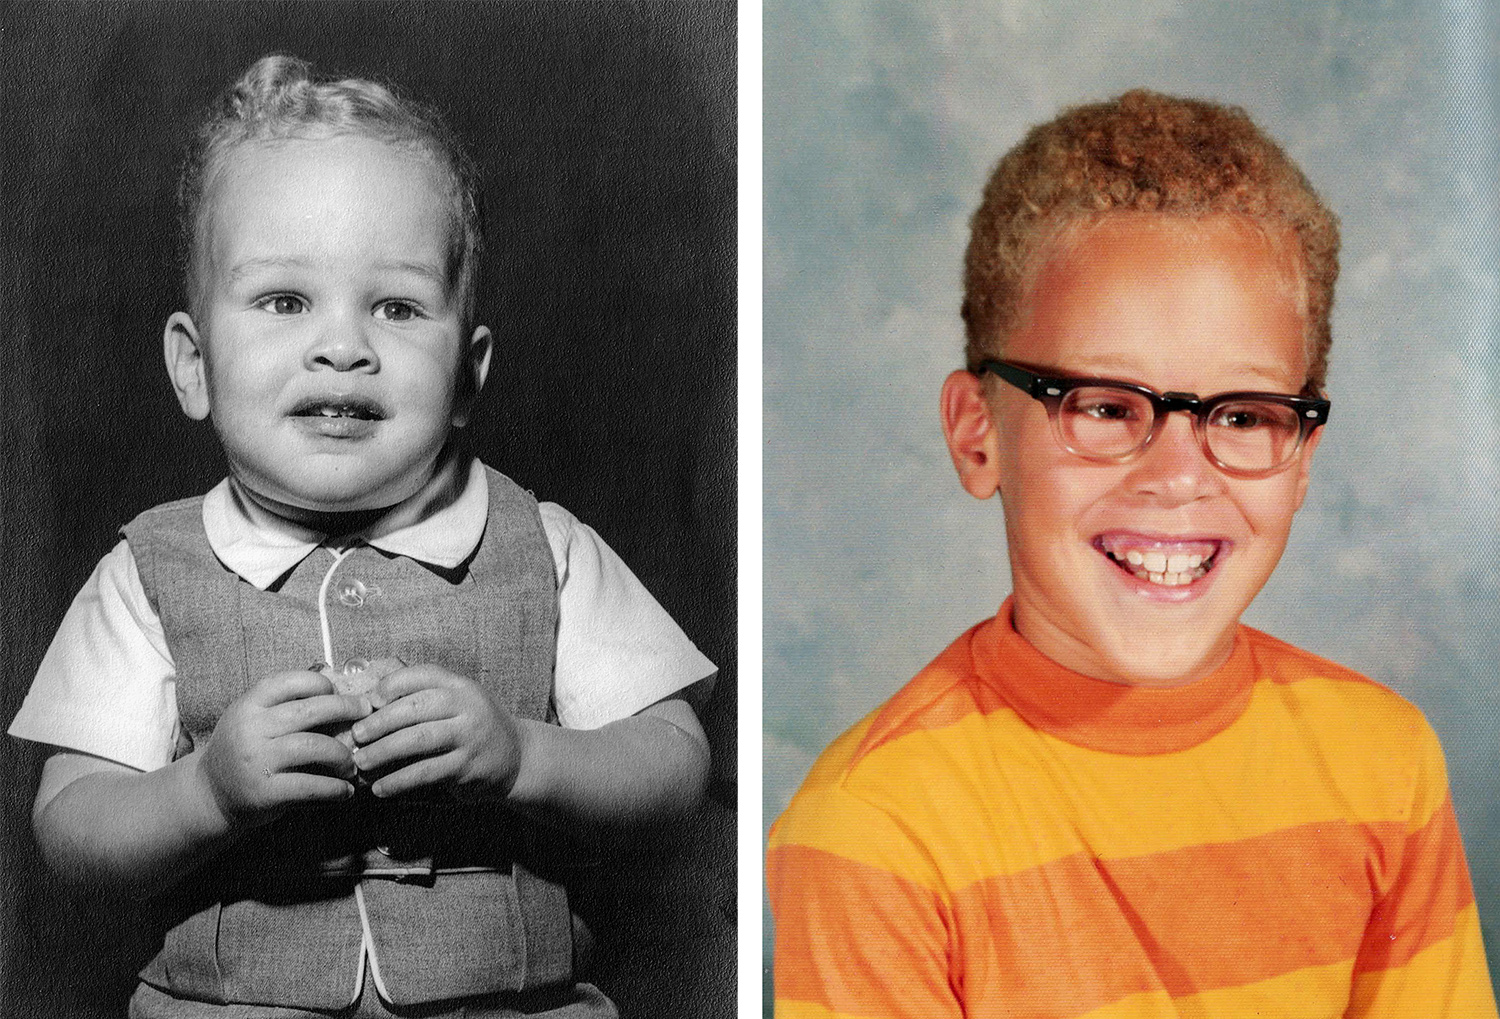 Robert Bryant as a two-year-old boy wearing white collared shirt and button up vest in black and white photo, and smiling as a 9-year-old boy with short, curly dark blonde hair, wearing dark rimmed glasses and a yellow and orange striped shirt in school photo